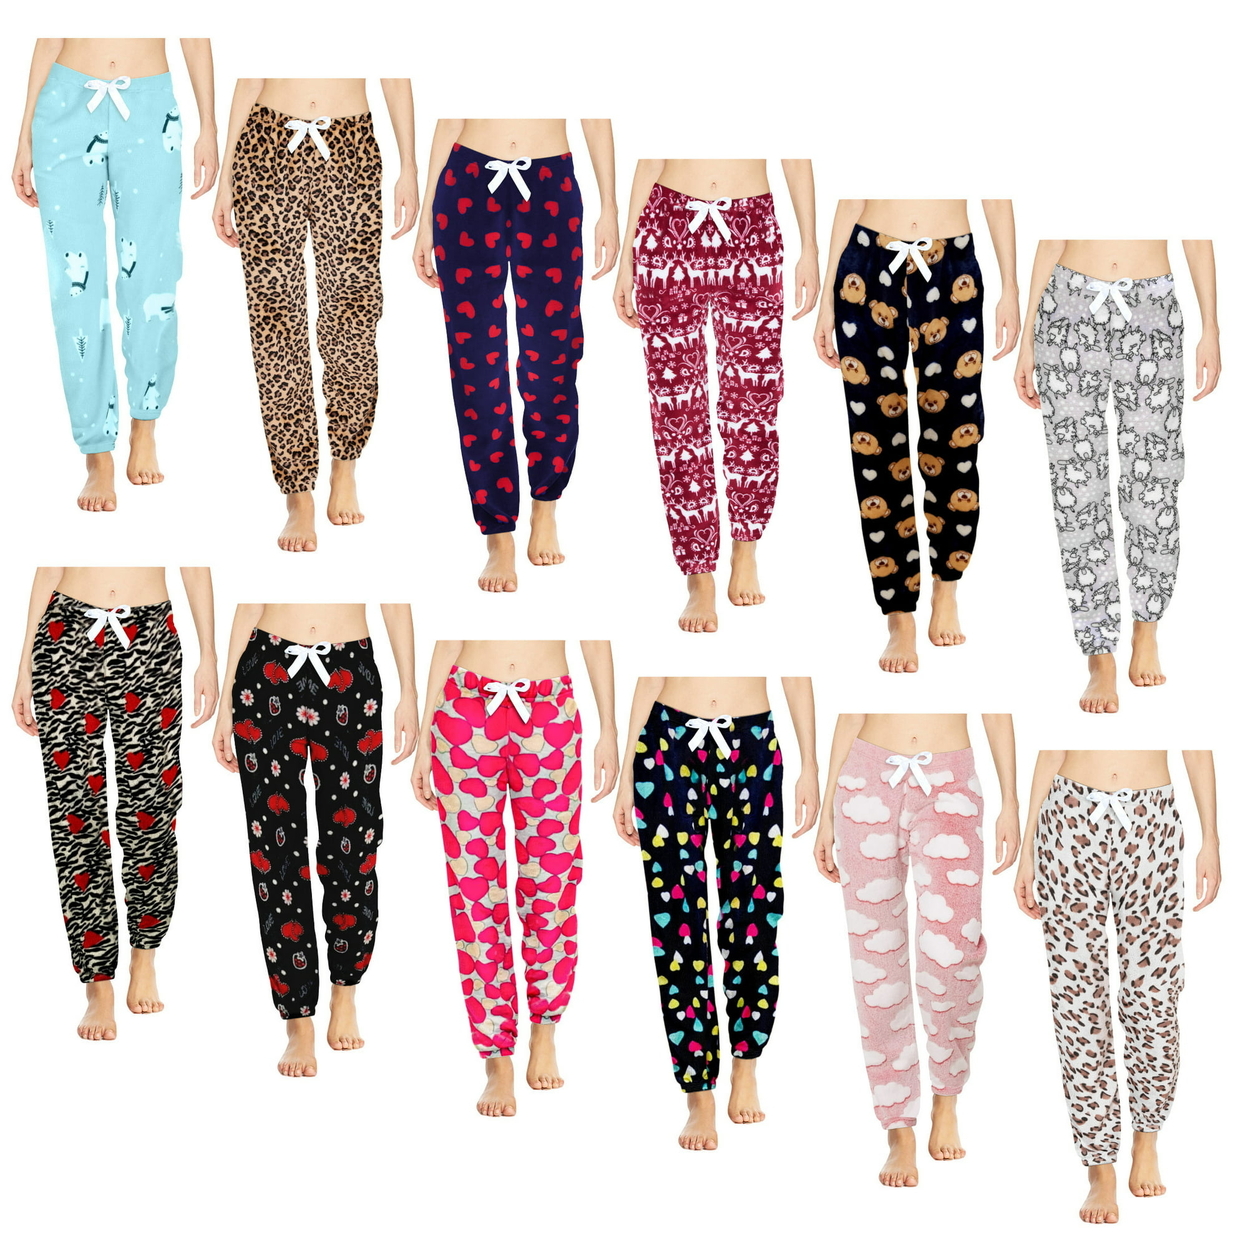 Multi-Pack: Women's Printed Ultra-Soft Comfy Stretch Micro-Fleece Pajama Lounge Pants - 1-pack, Shapes, Large